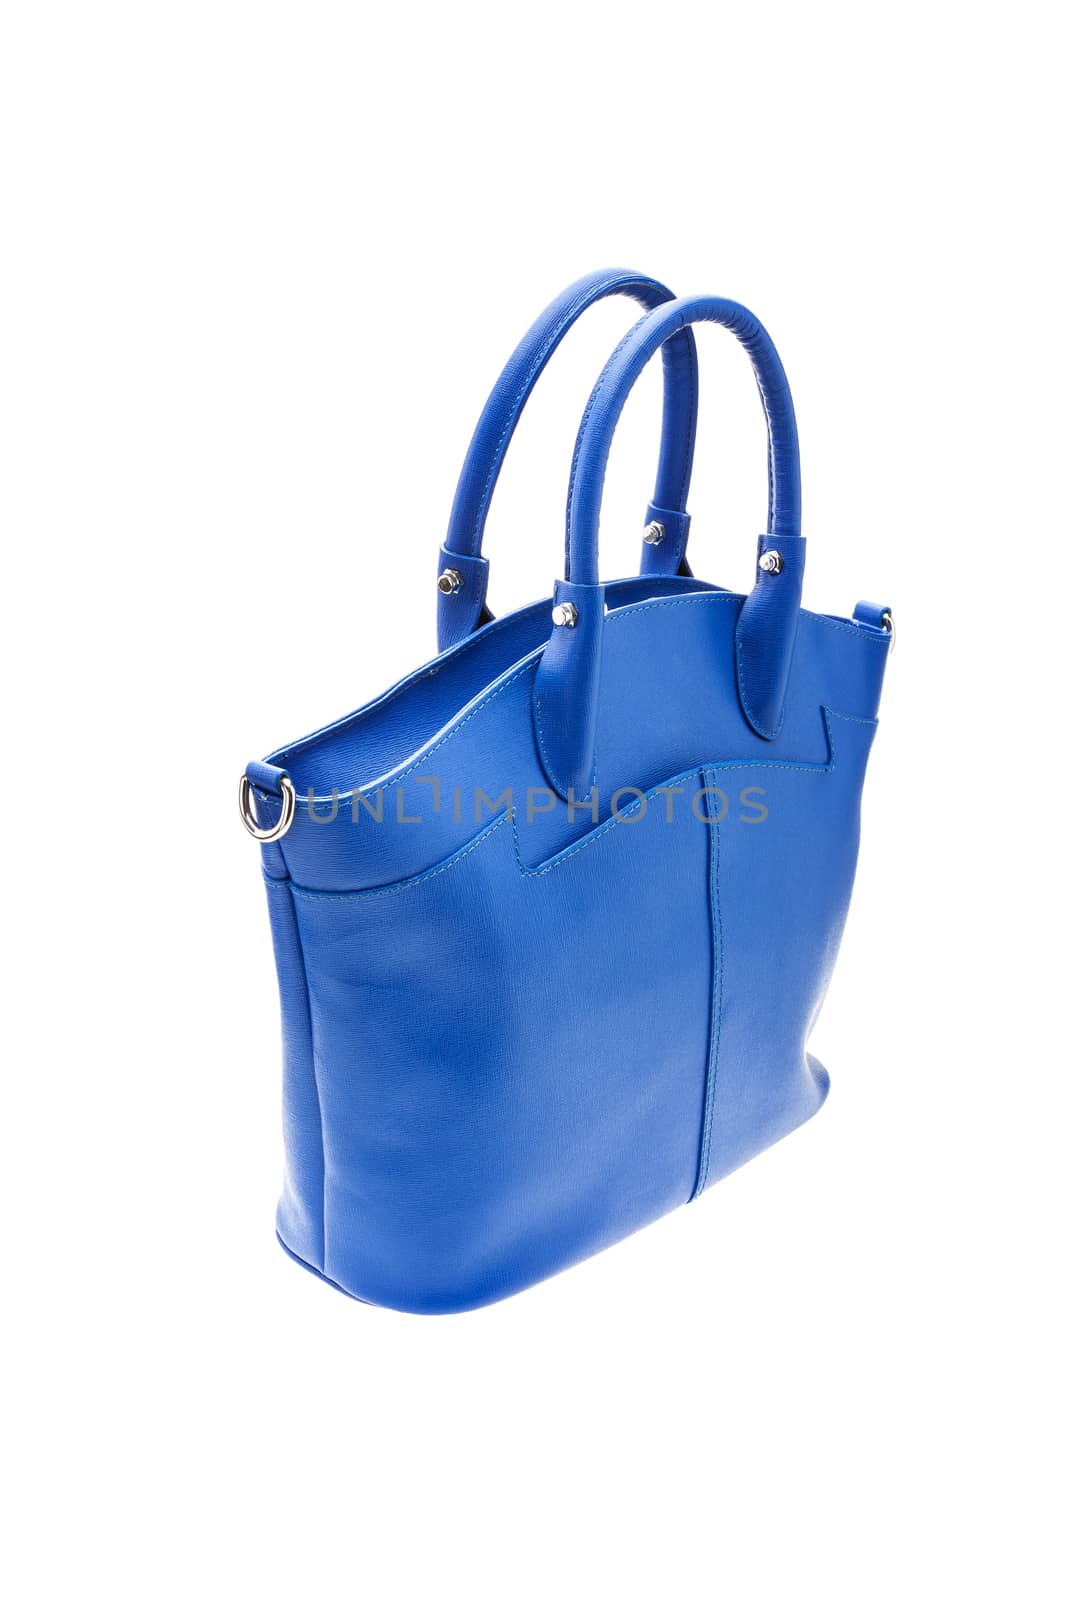 New blue womens bag isolated on white background.